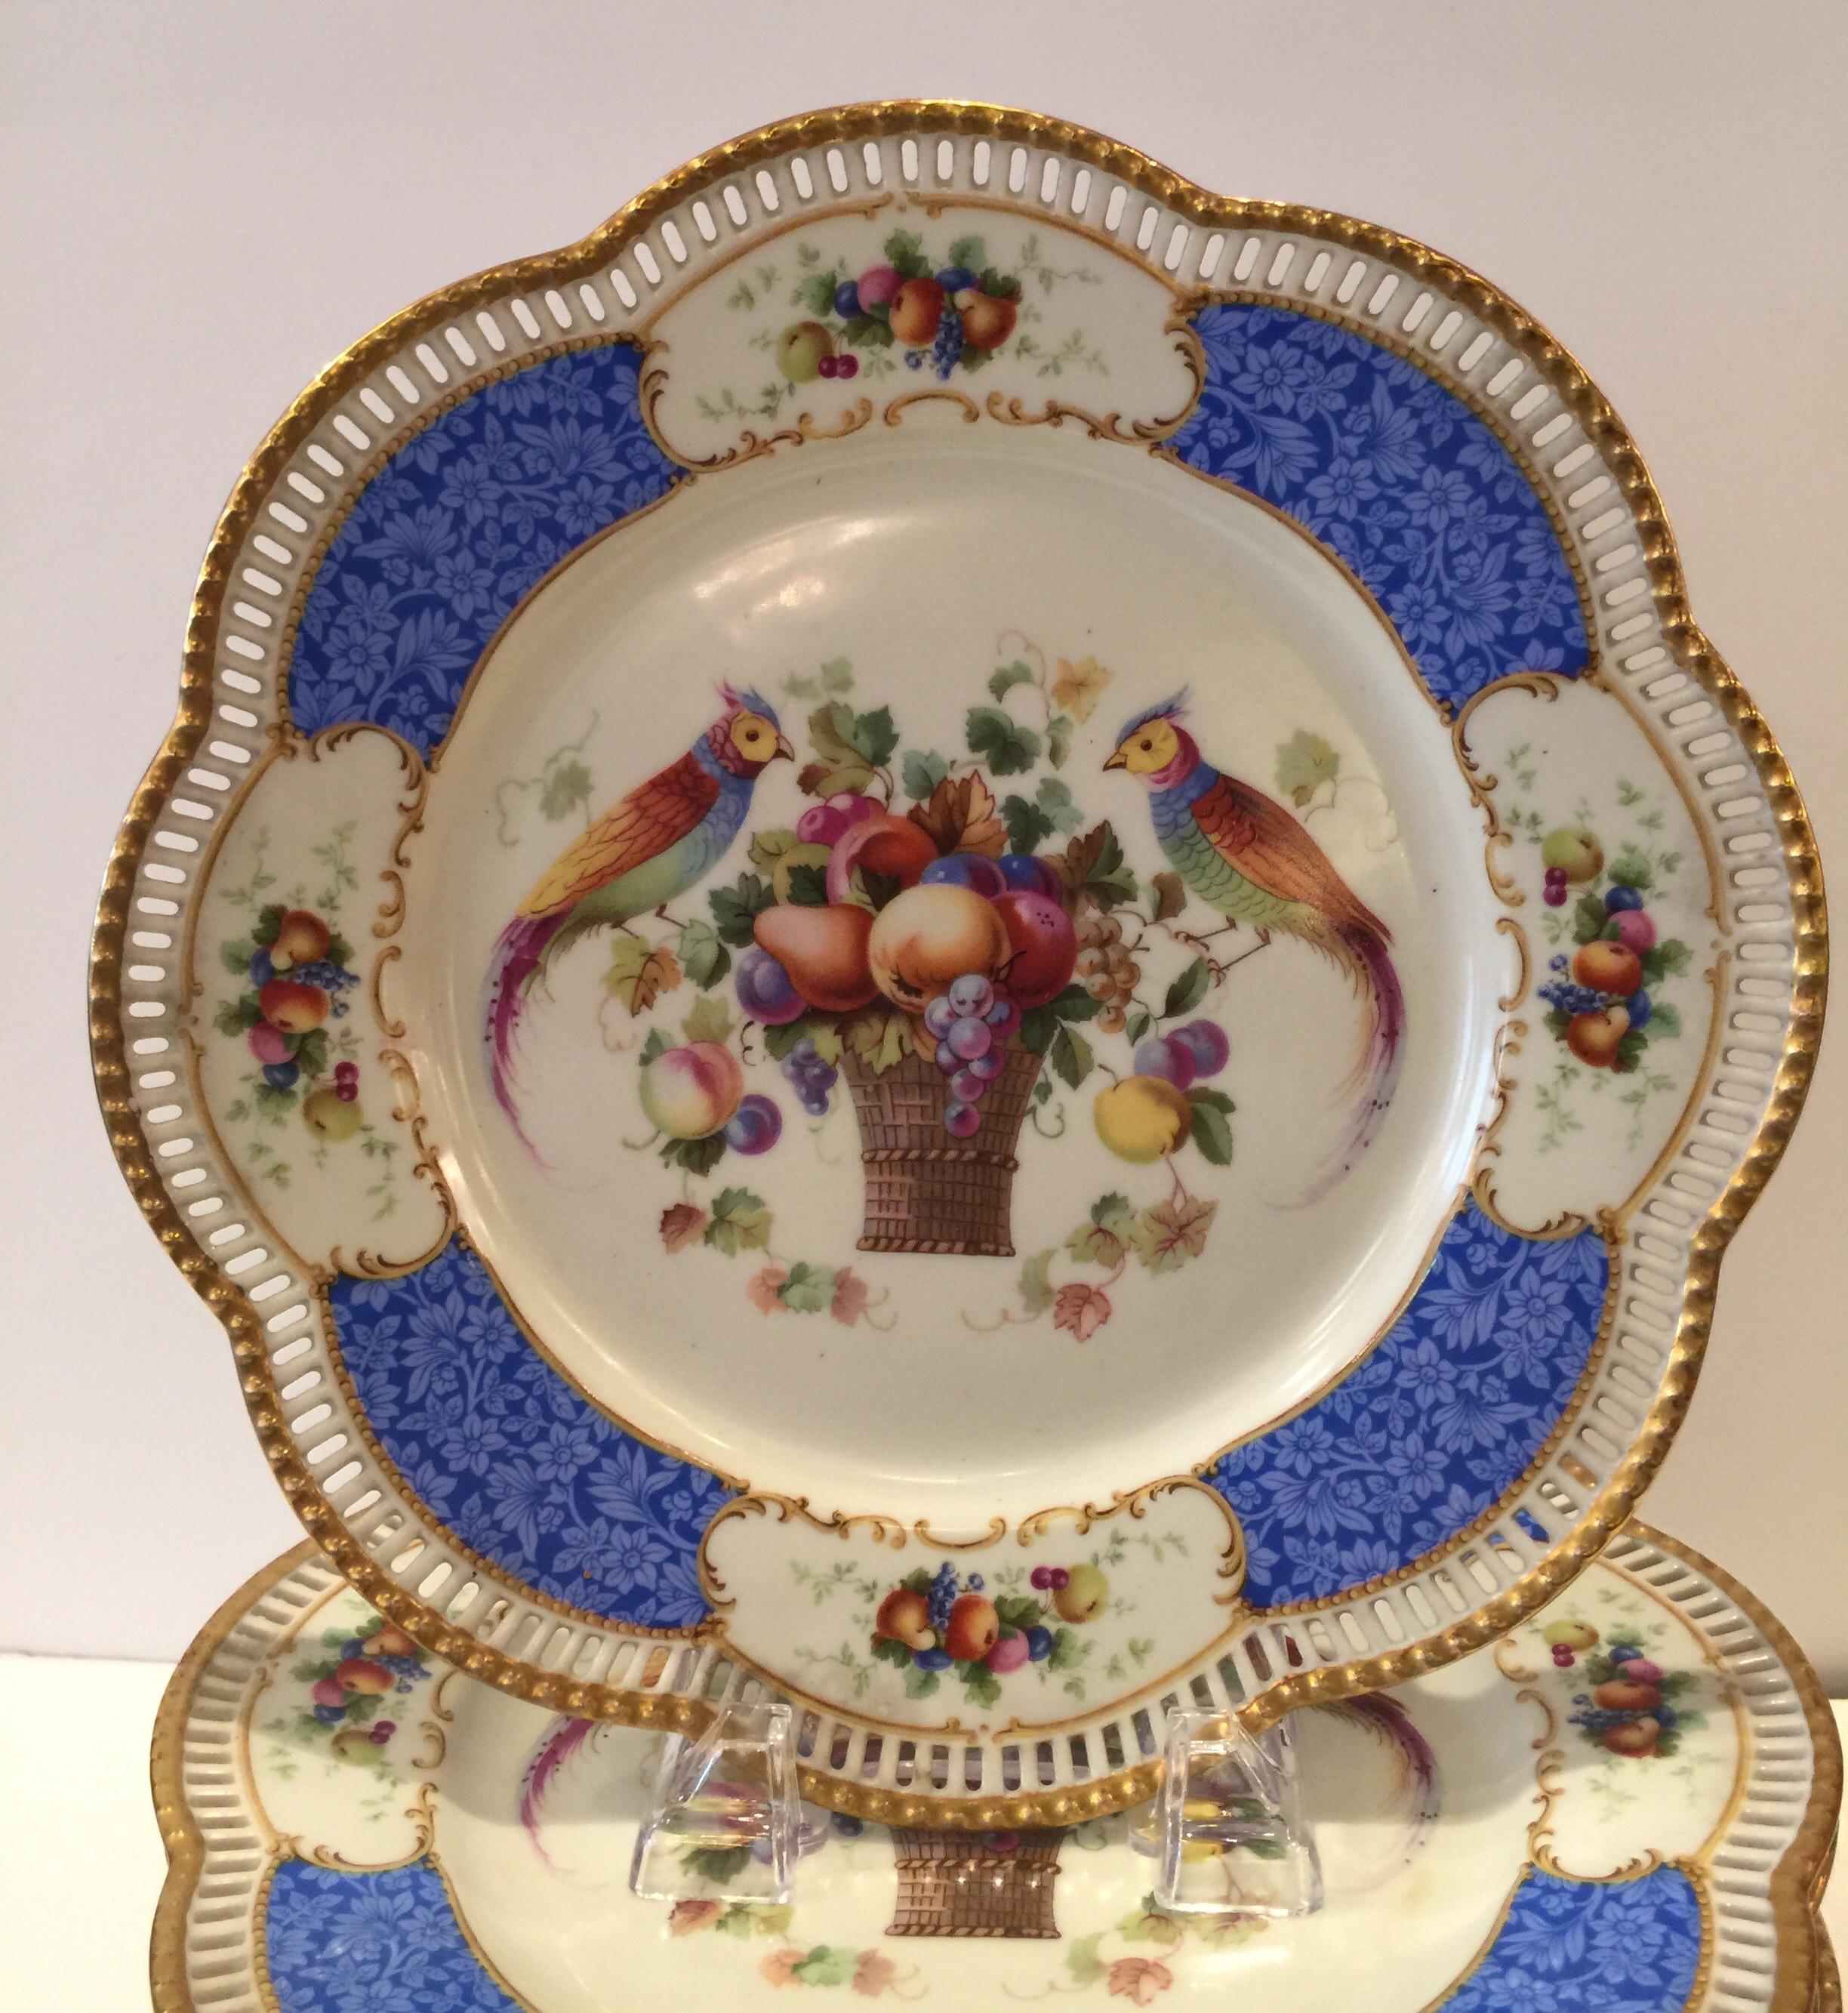 Set of twelve Bavarian reticulated dinner/service with birds and flowers plates
Dimensions: 11